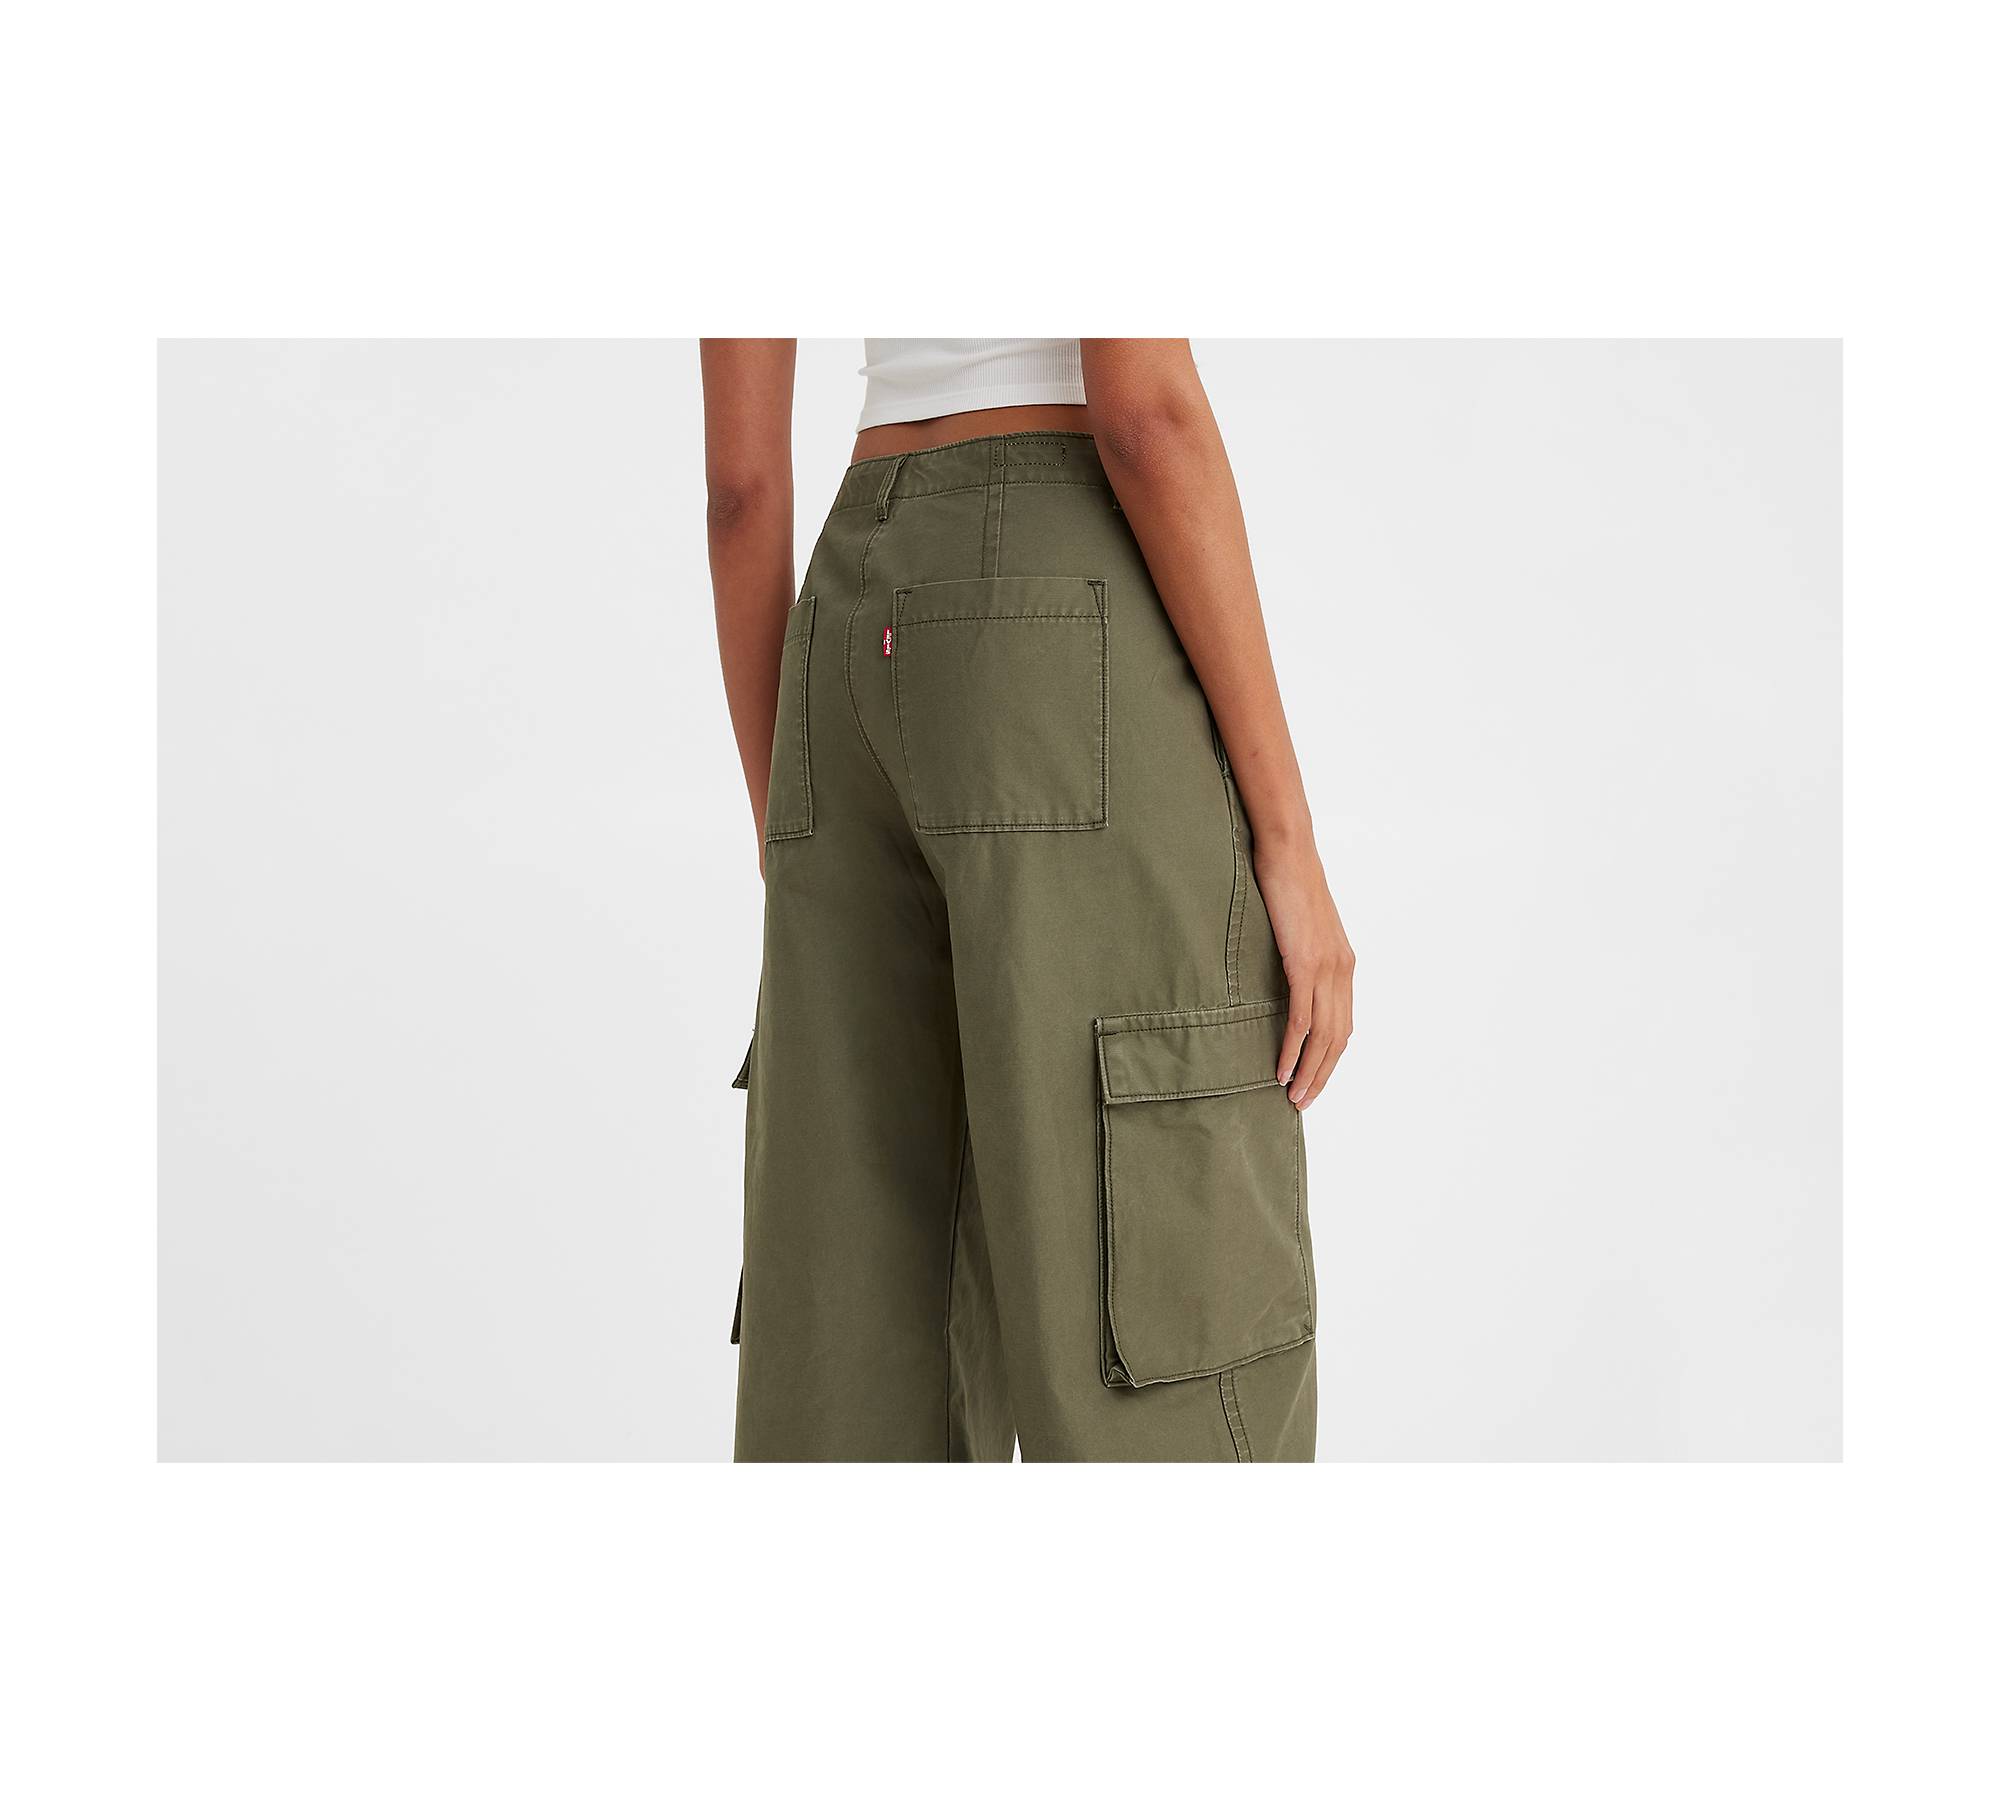 Baggy Cargo Pants - Stylish and Functional Pants for Men and Women